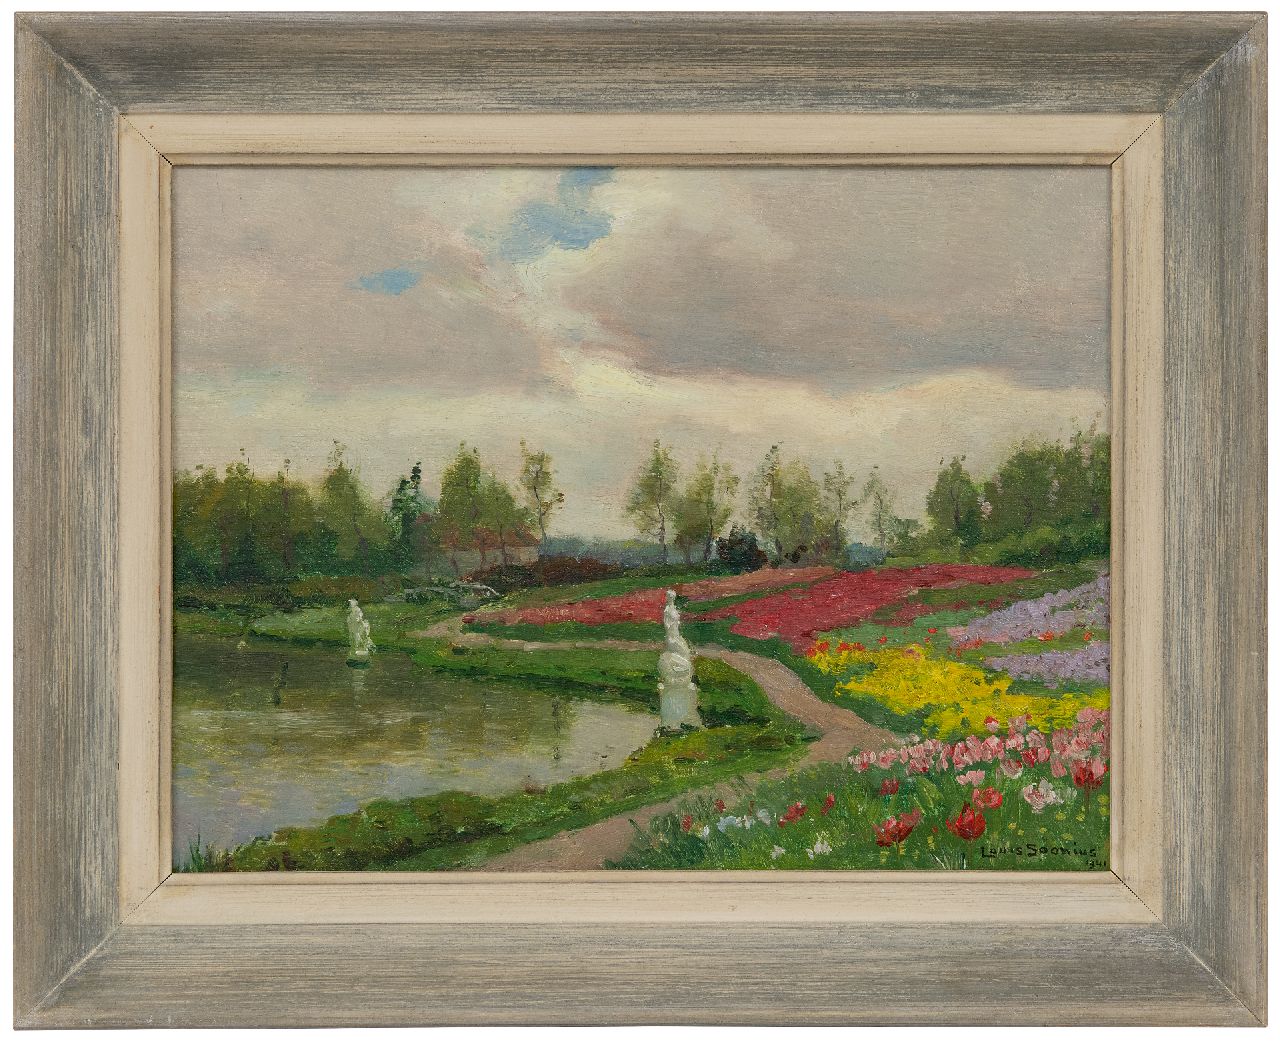 Soonius L.  | Lodewijk 'Louis' Soonius | Paintings offered for sale | Bulbfields by a pond, oil on canvas 27.5 x 36.0 cm, signed l.r. and dated 1941